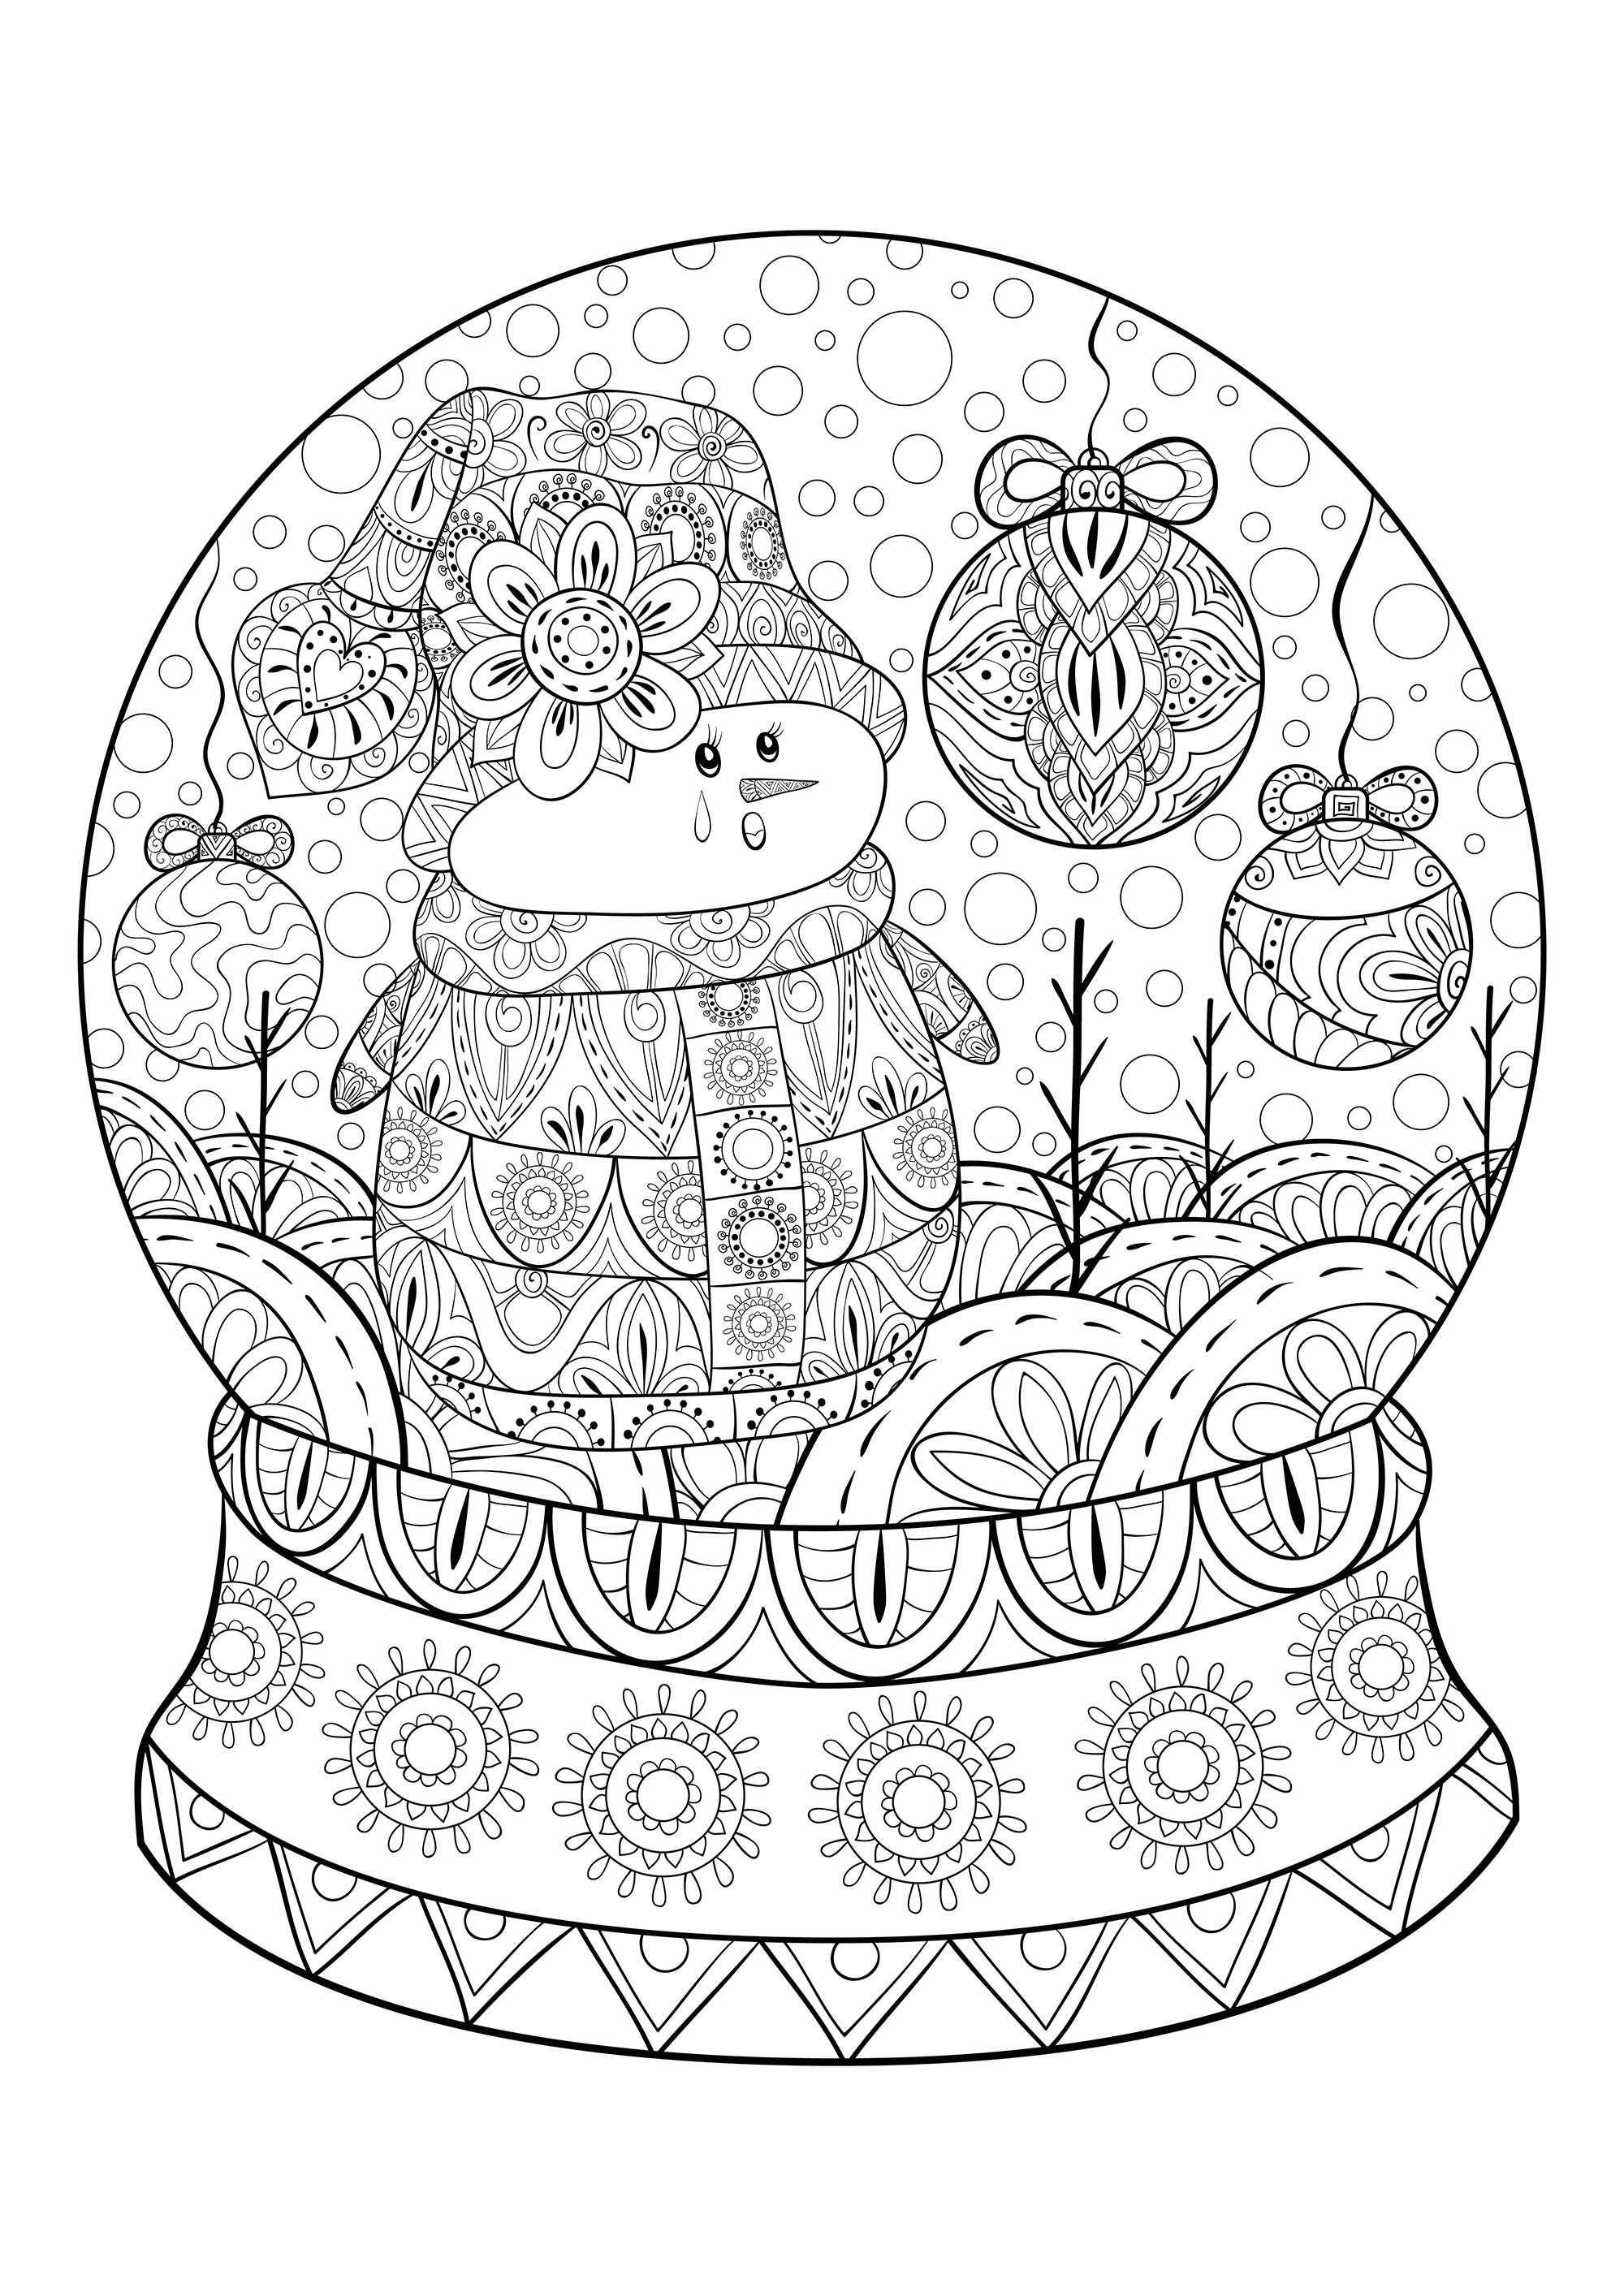 A snowman in a Christmas ball, with many elements and patterns